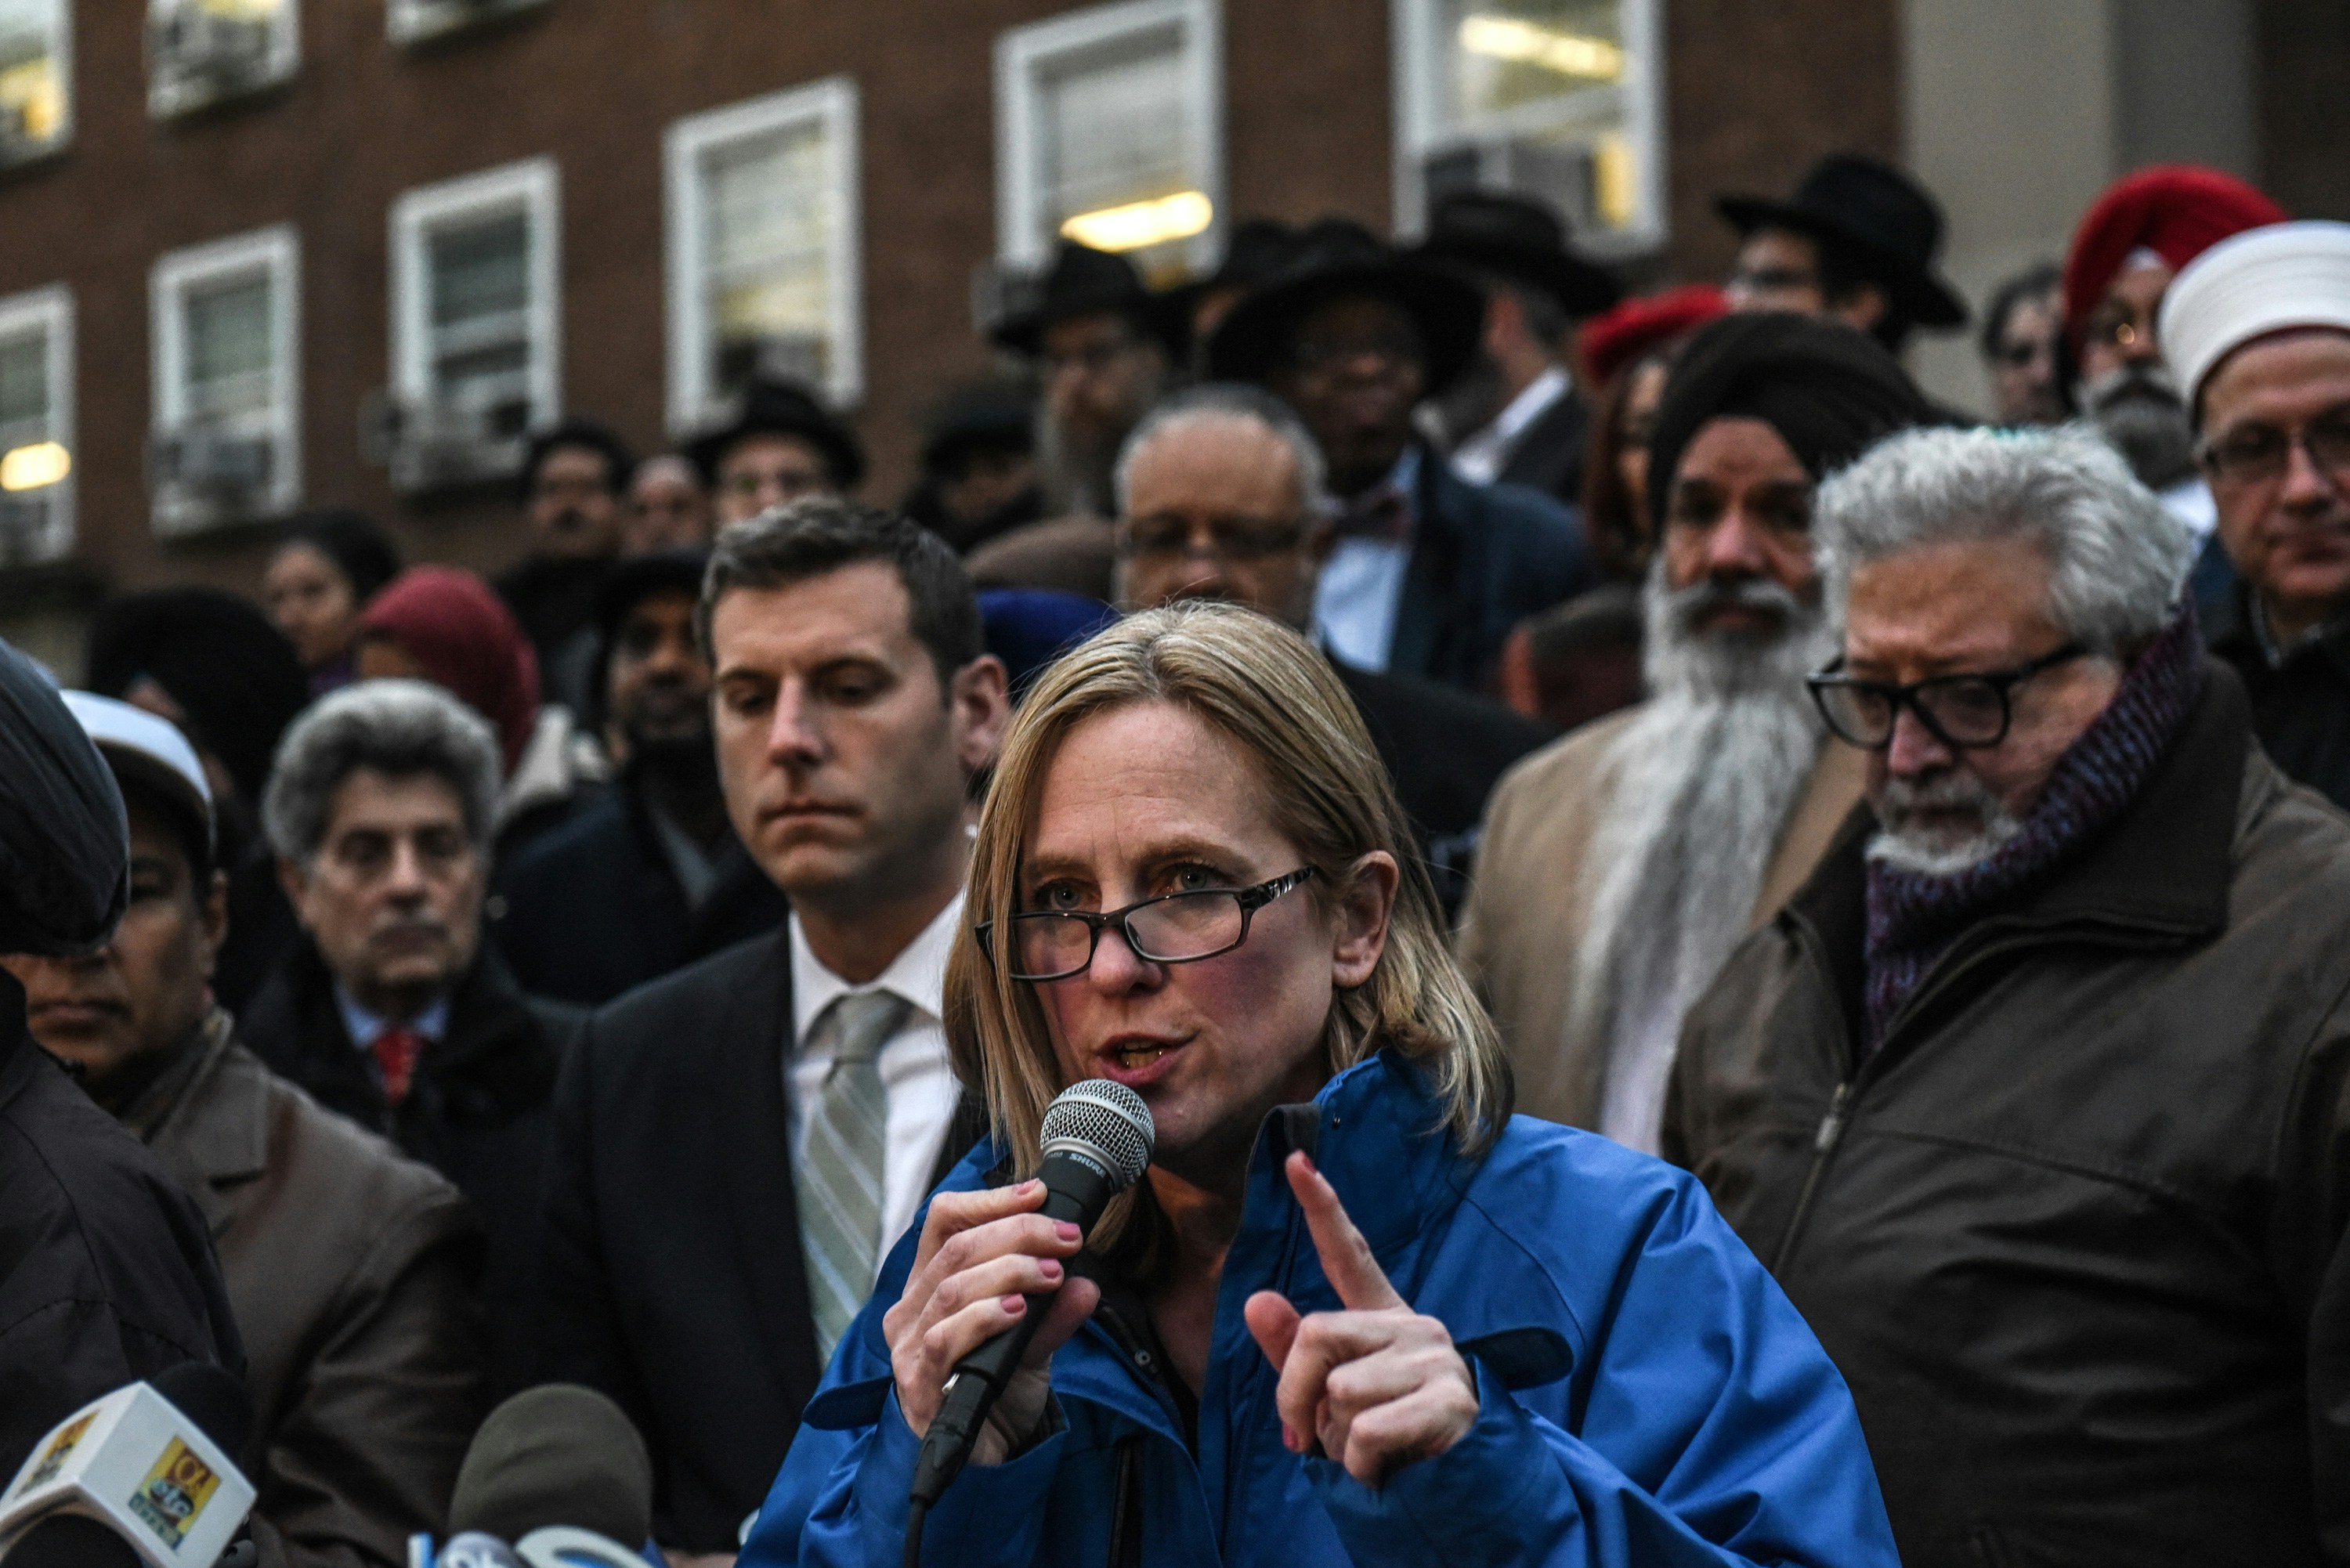 NEW YORK, NY - OCTOBER 29: Melinda Katz, the Queens Borough president, speaks during a vigil in memory of the victims of the mass shooting at the Tree Of Life Synagogue on the steps of Queens Borough Hall on October 29, 2018 in New York City. Eleven people were killed and six more were wounded in the mass shooting that police say was fueled by antisemitism. (Photo by Stephanie Keith/Getty Images)